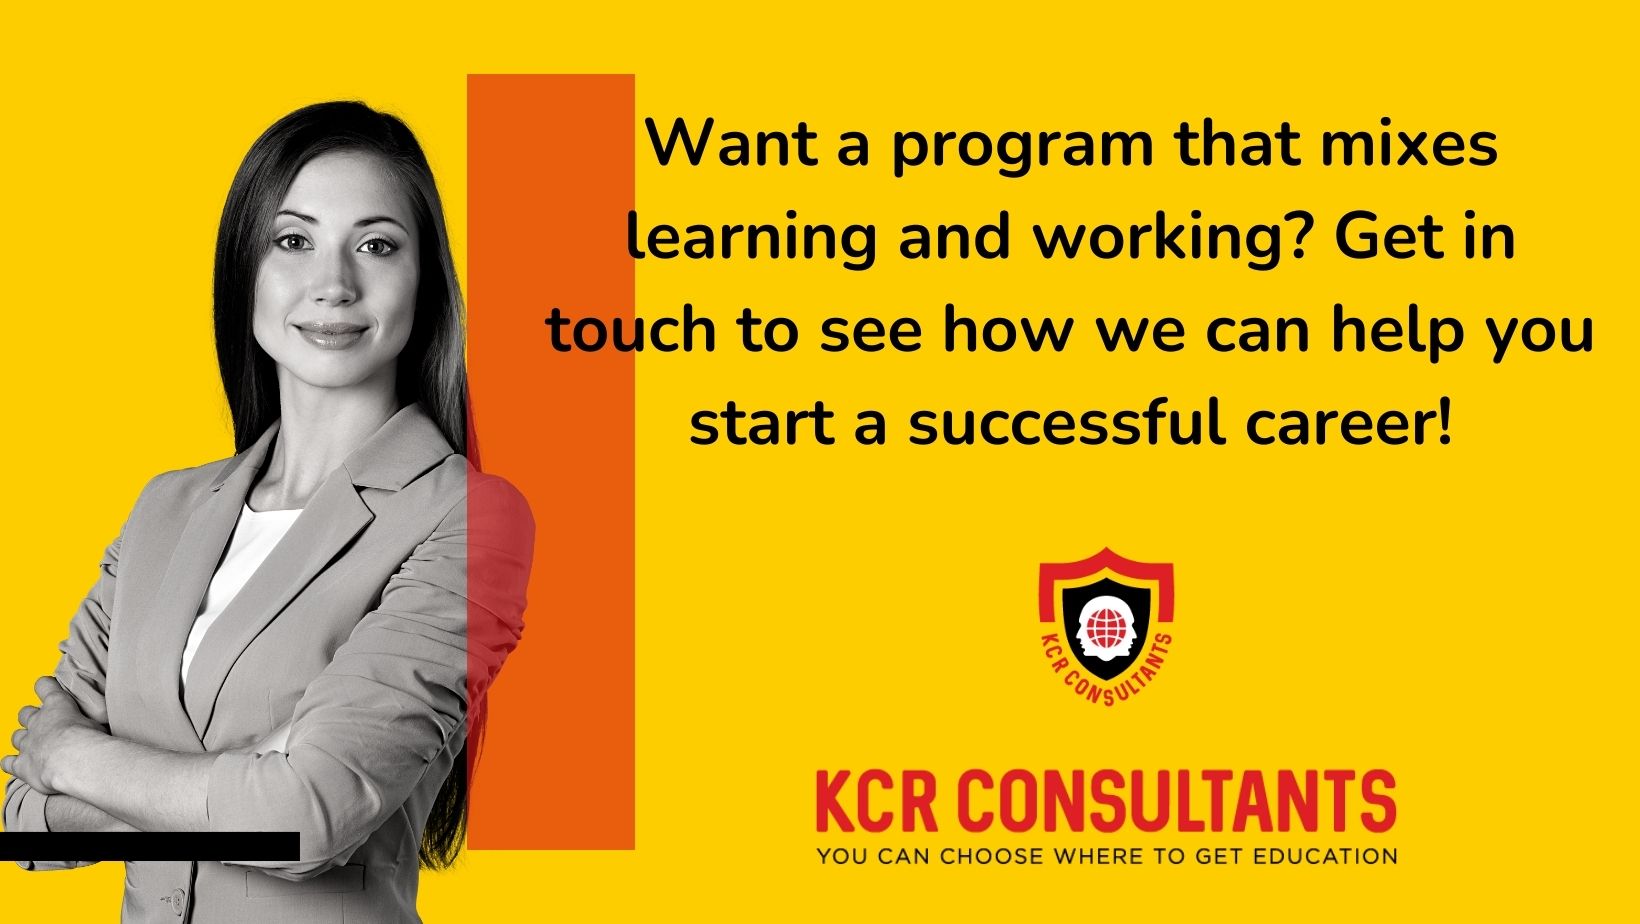 AUSBILDUNG COURSES IN GERMANY - KCR CONSULTANTS - Contact us